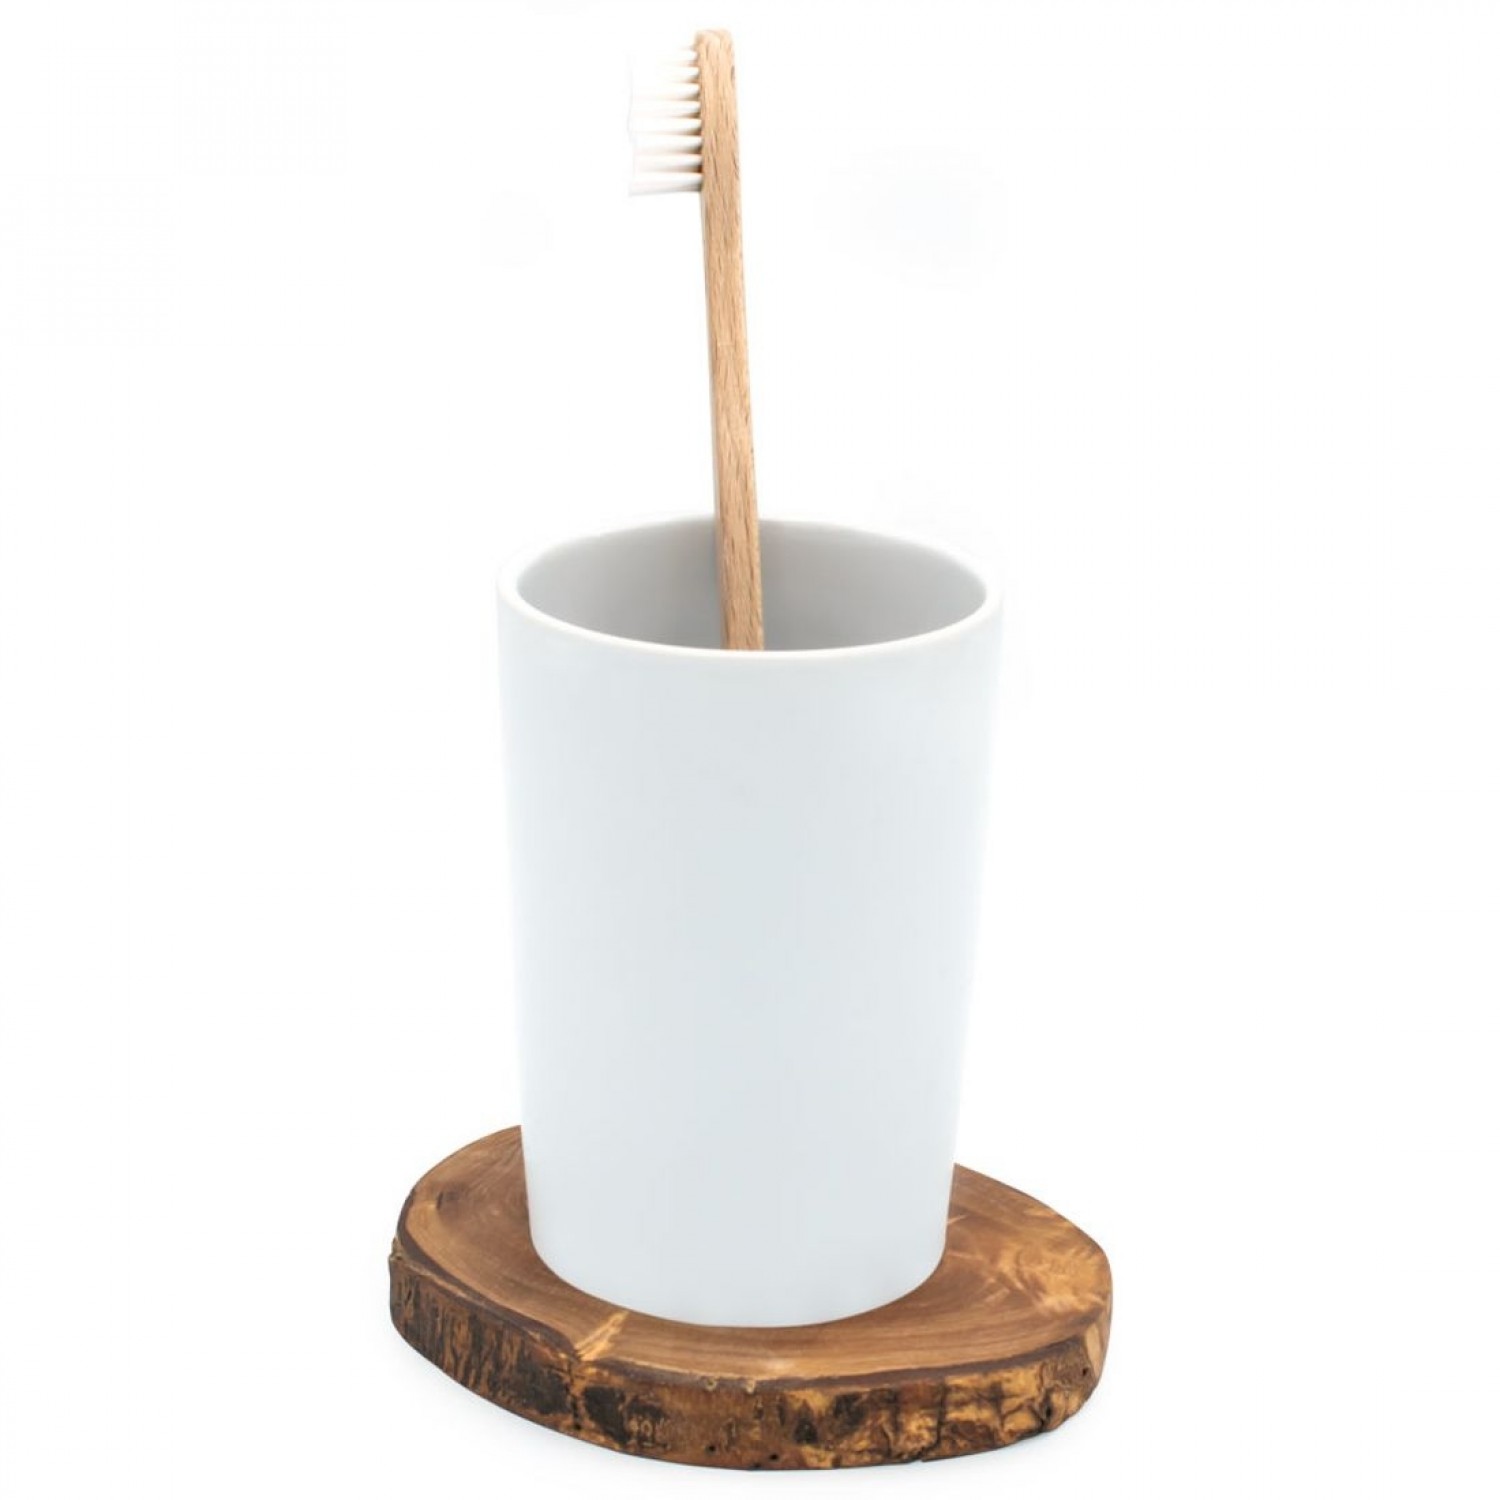 Toothbrush Cup PLATEAU on olive wood base » D.O.M.